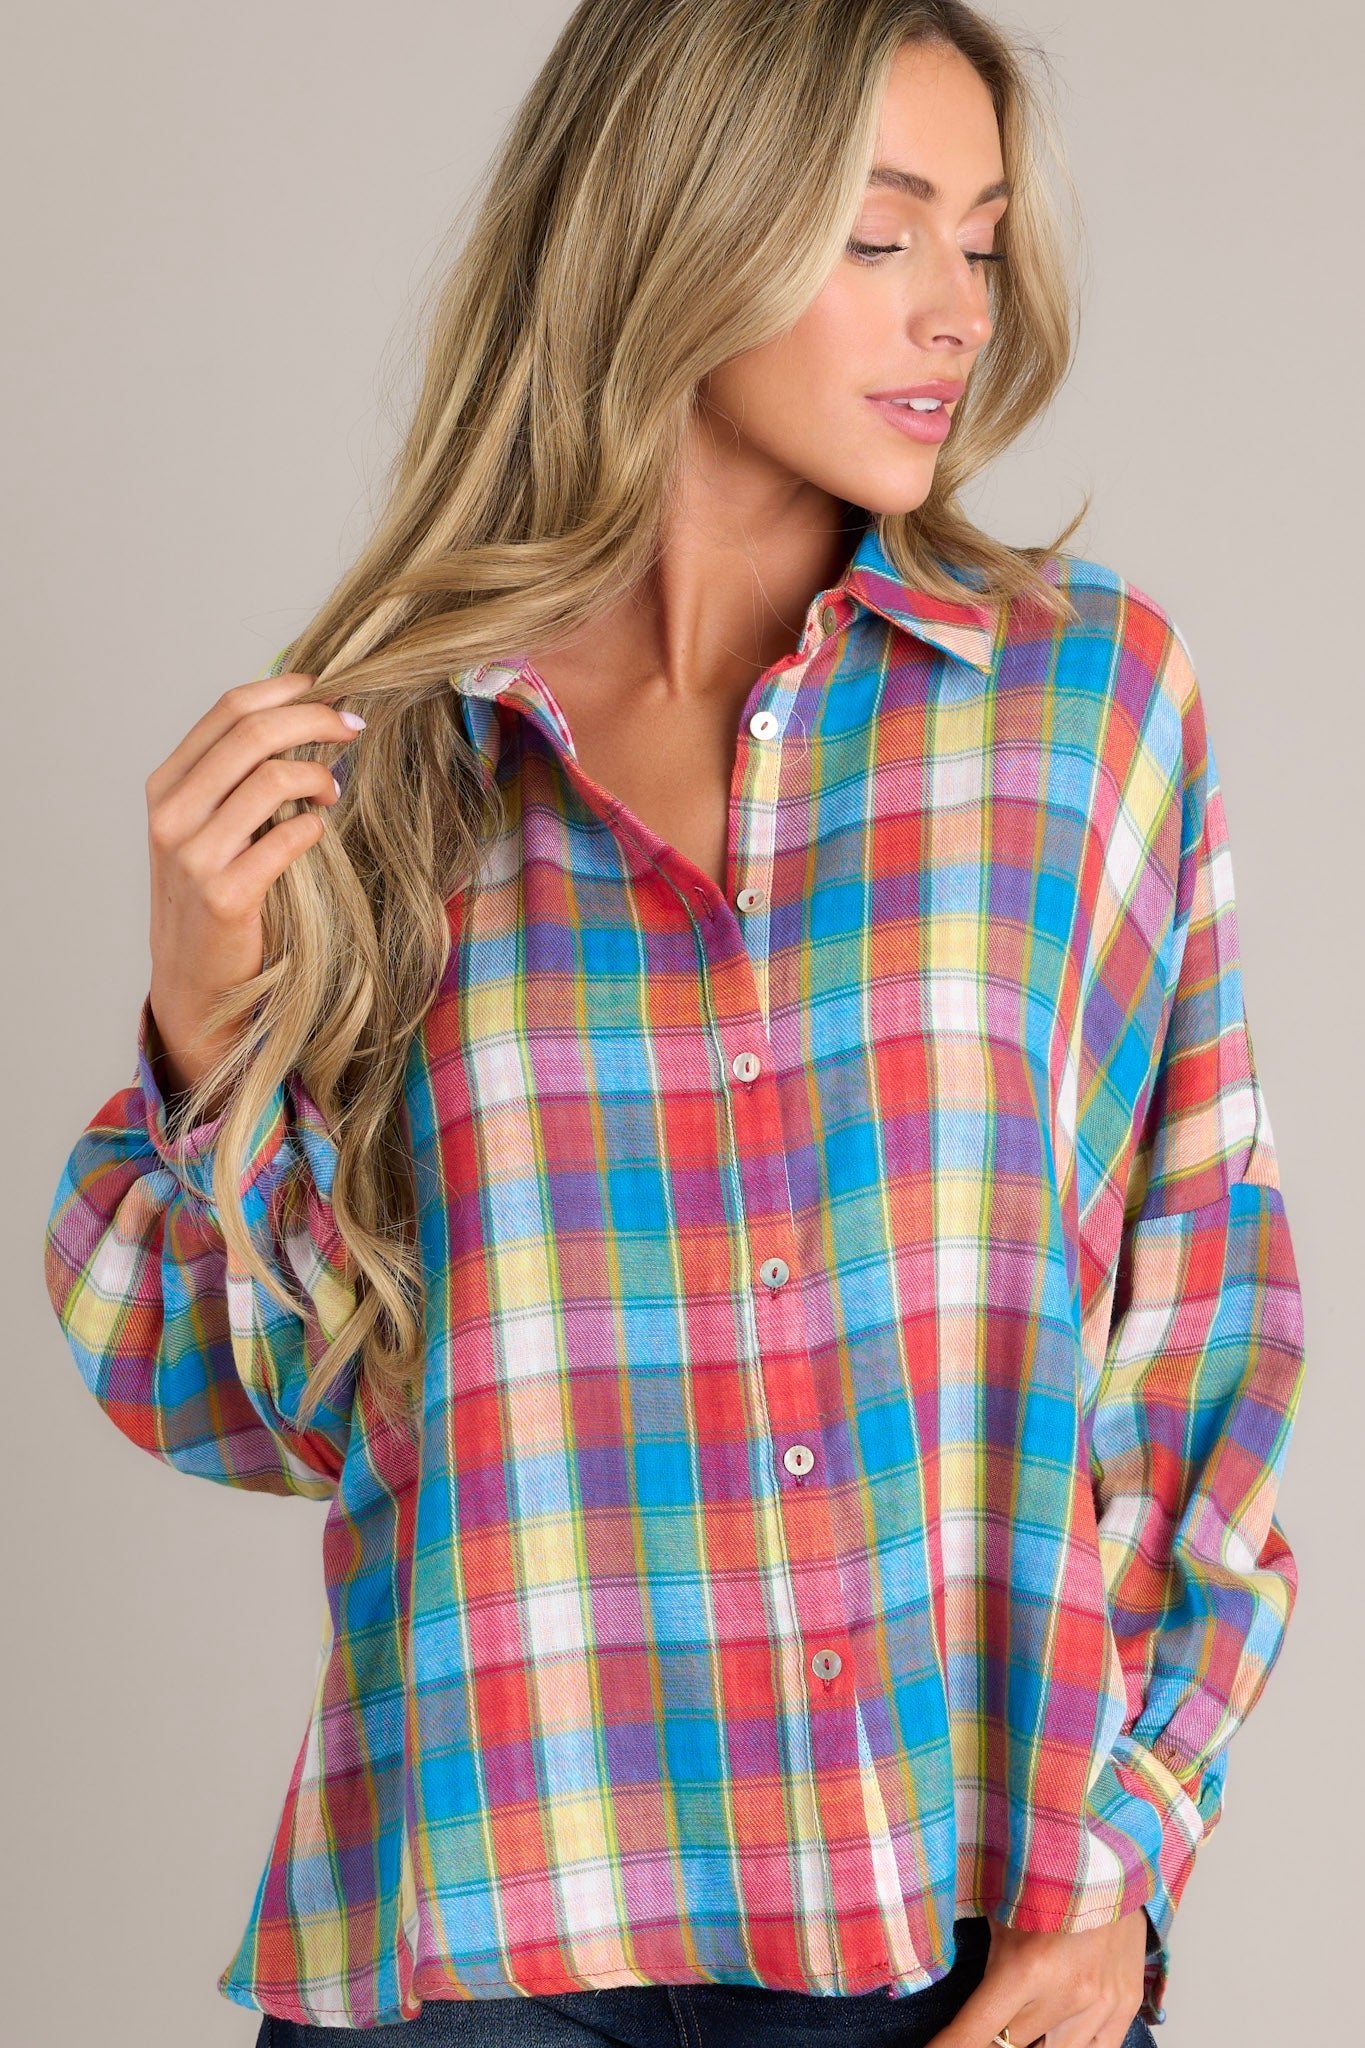 Doesn't Add Up Blue Multi Plaid Top - Red Dress